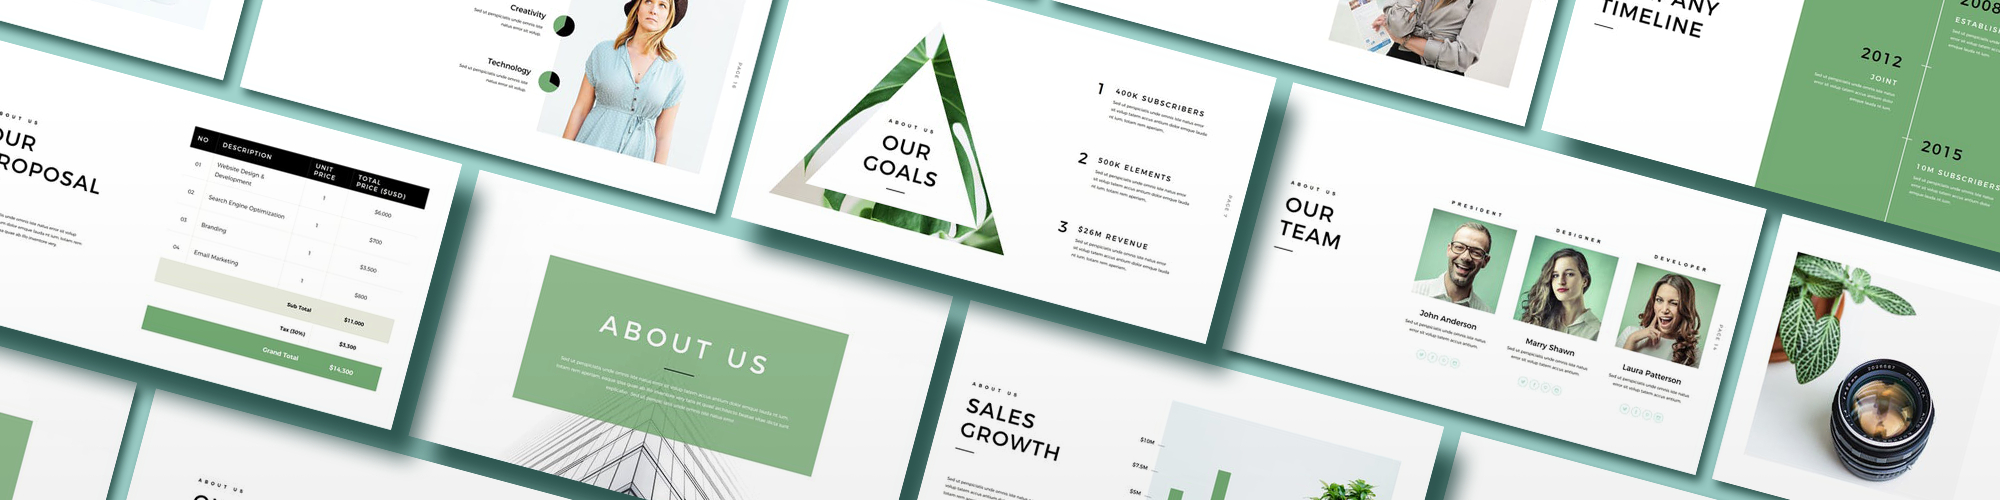 20 Best Powerpoint Templates For Presentations In 2019 – Envato Within Business Card Template Powerpoint Free